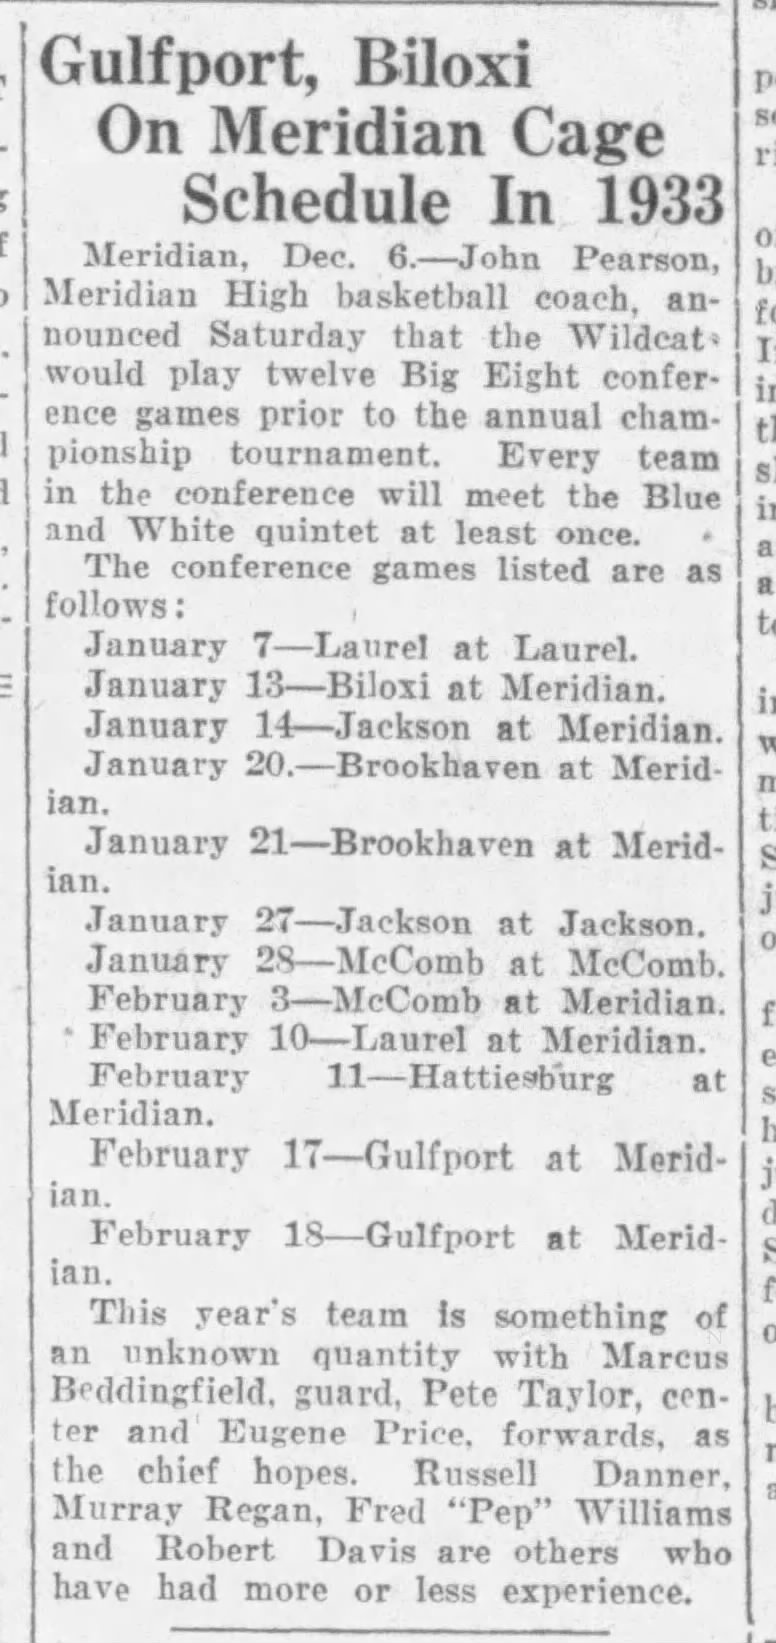 Gulfport, Biloxi on Meridian Cage Schedule in 1933